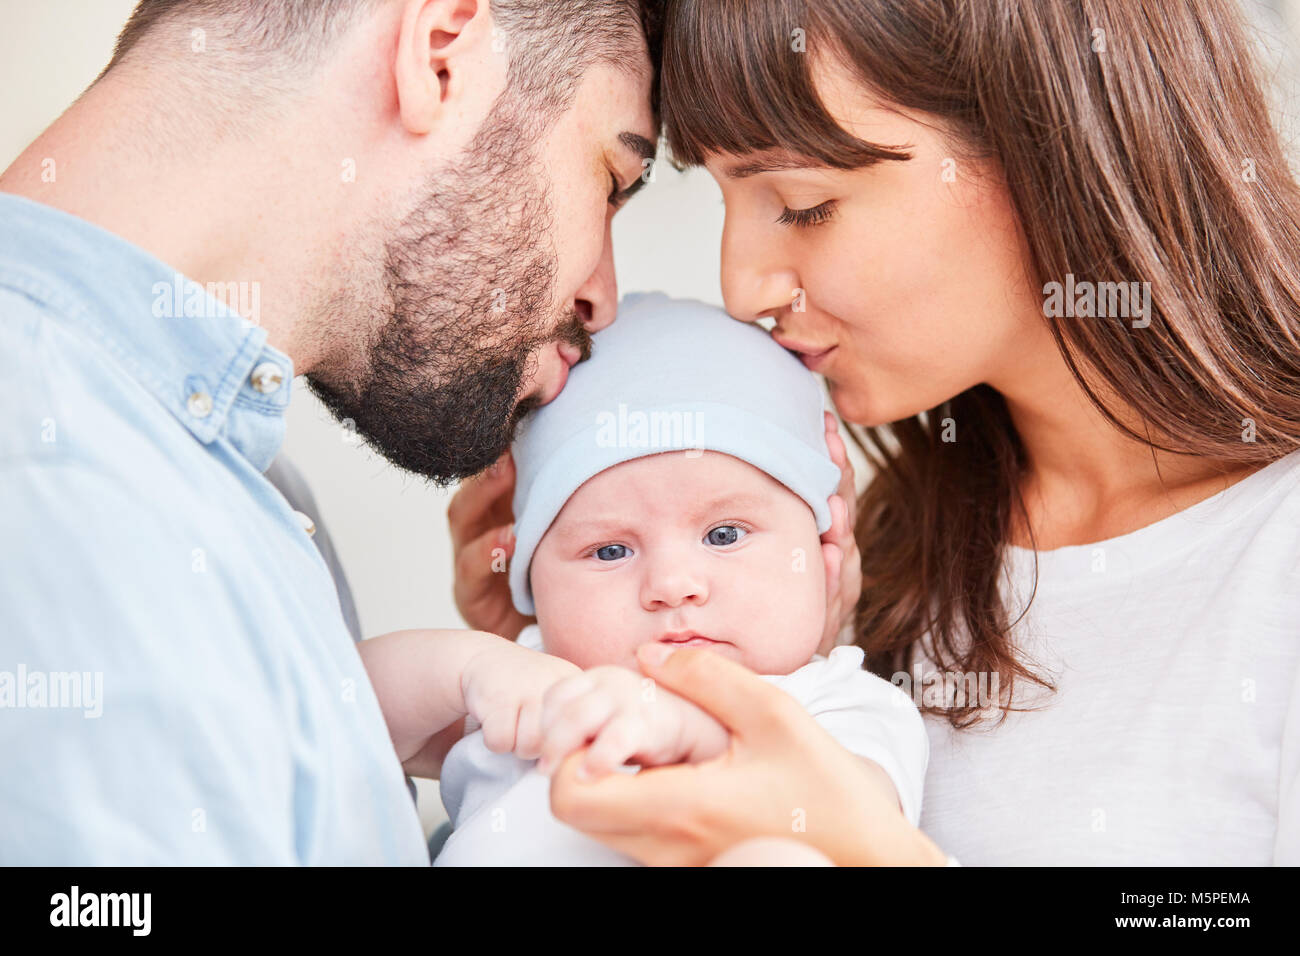 Mother and father together kiss their baby on the forehead Stock Photo